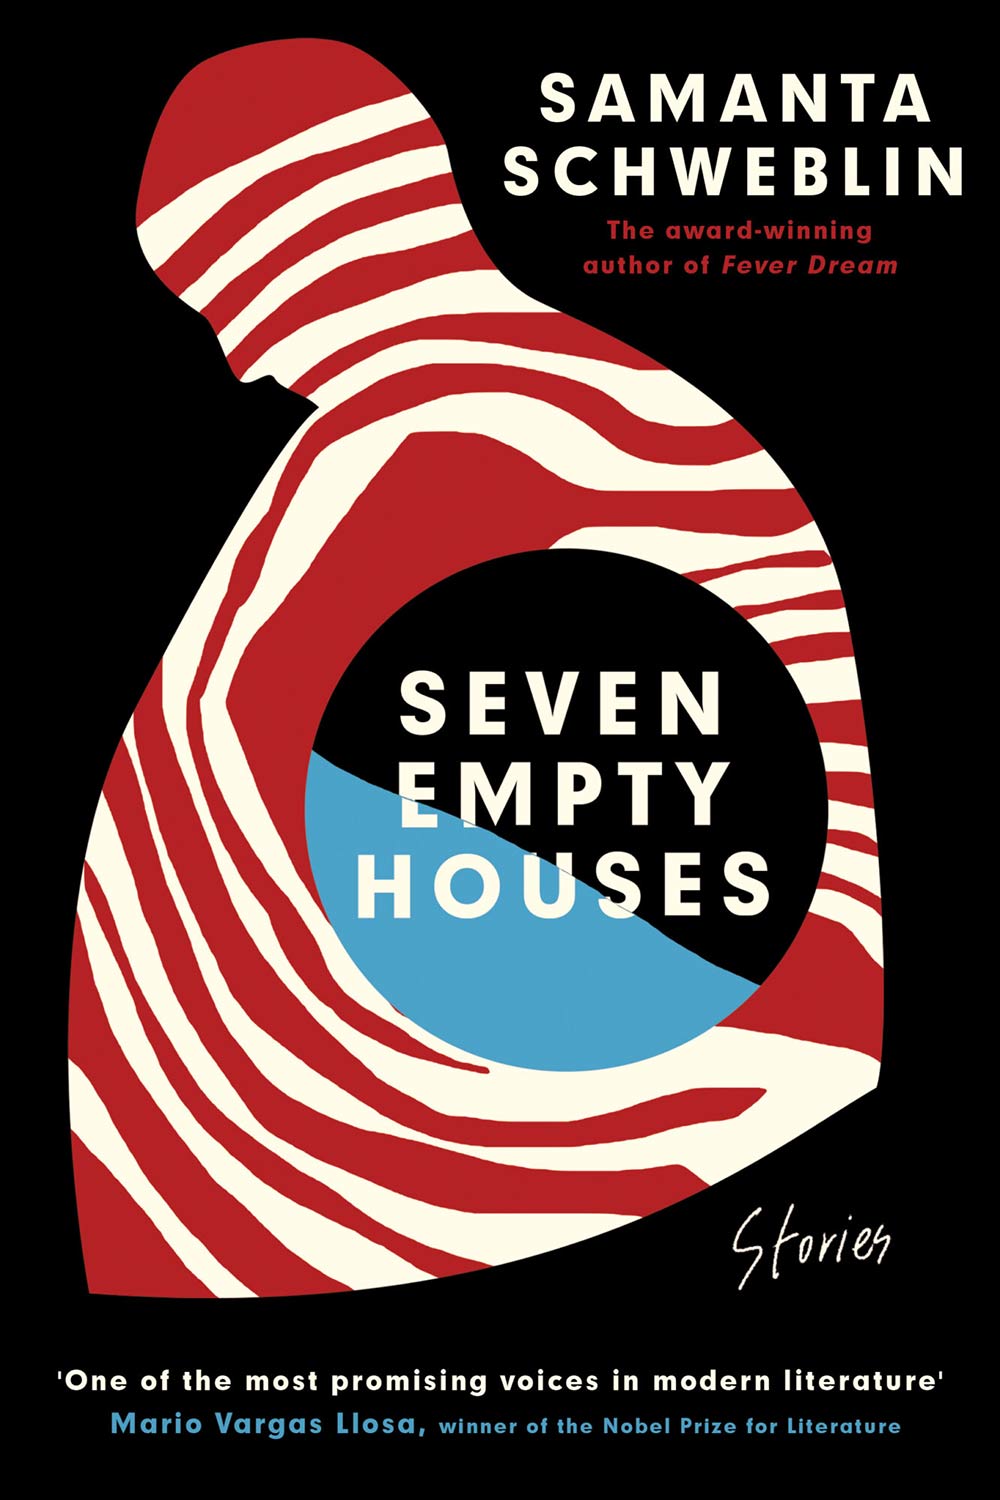 The cover Seven Empty Houses by Samantha Schweblin